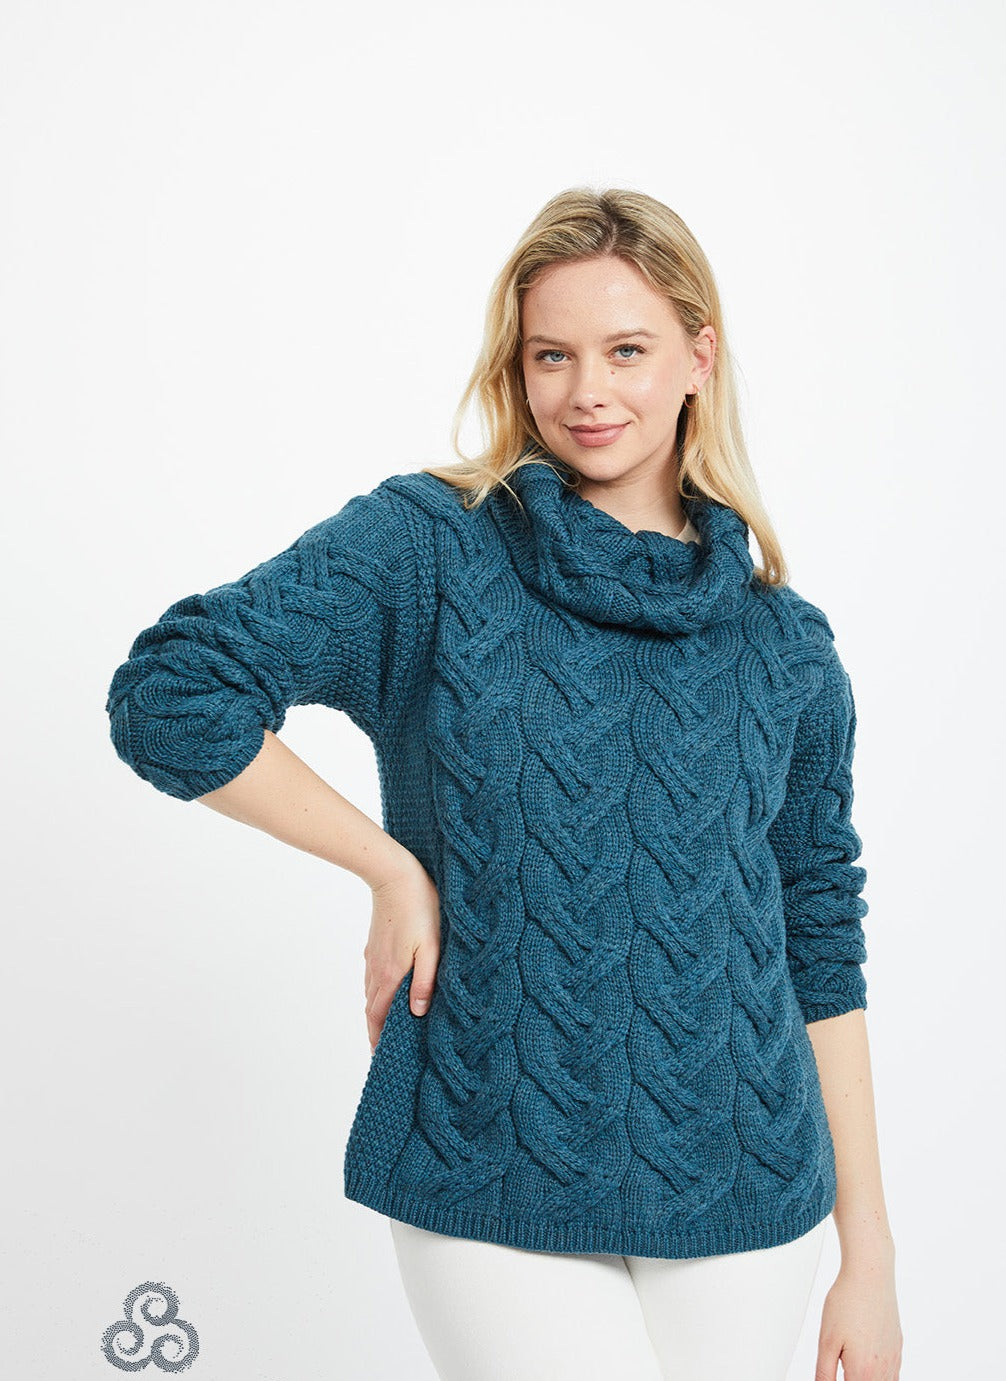 Cable Knit sweater with Cowl Neck